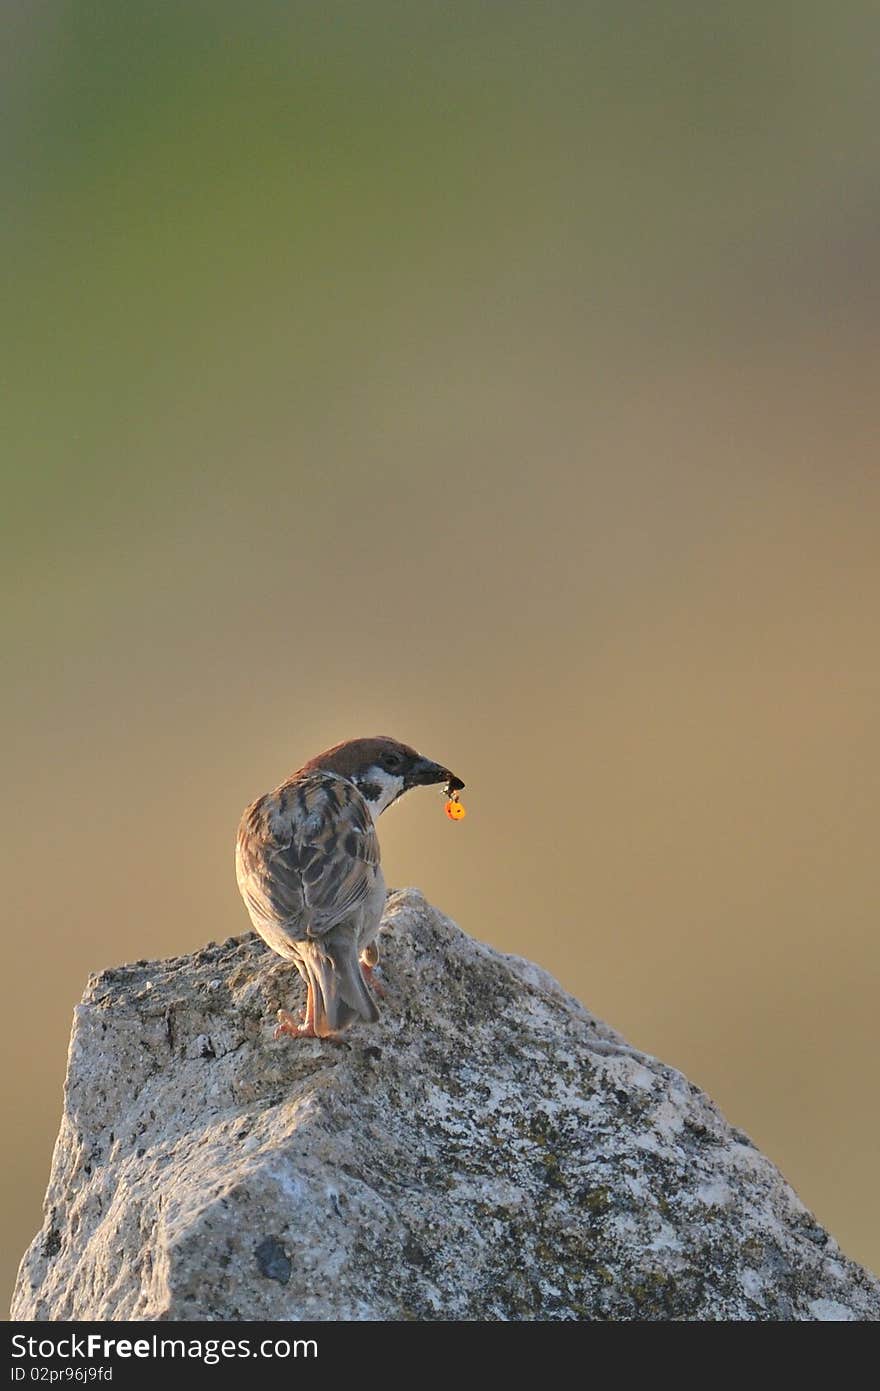 Little bird sitting on a stone and eating a ladybug. Little bird sitting on a stone and eating a ladybug